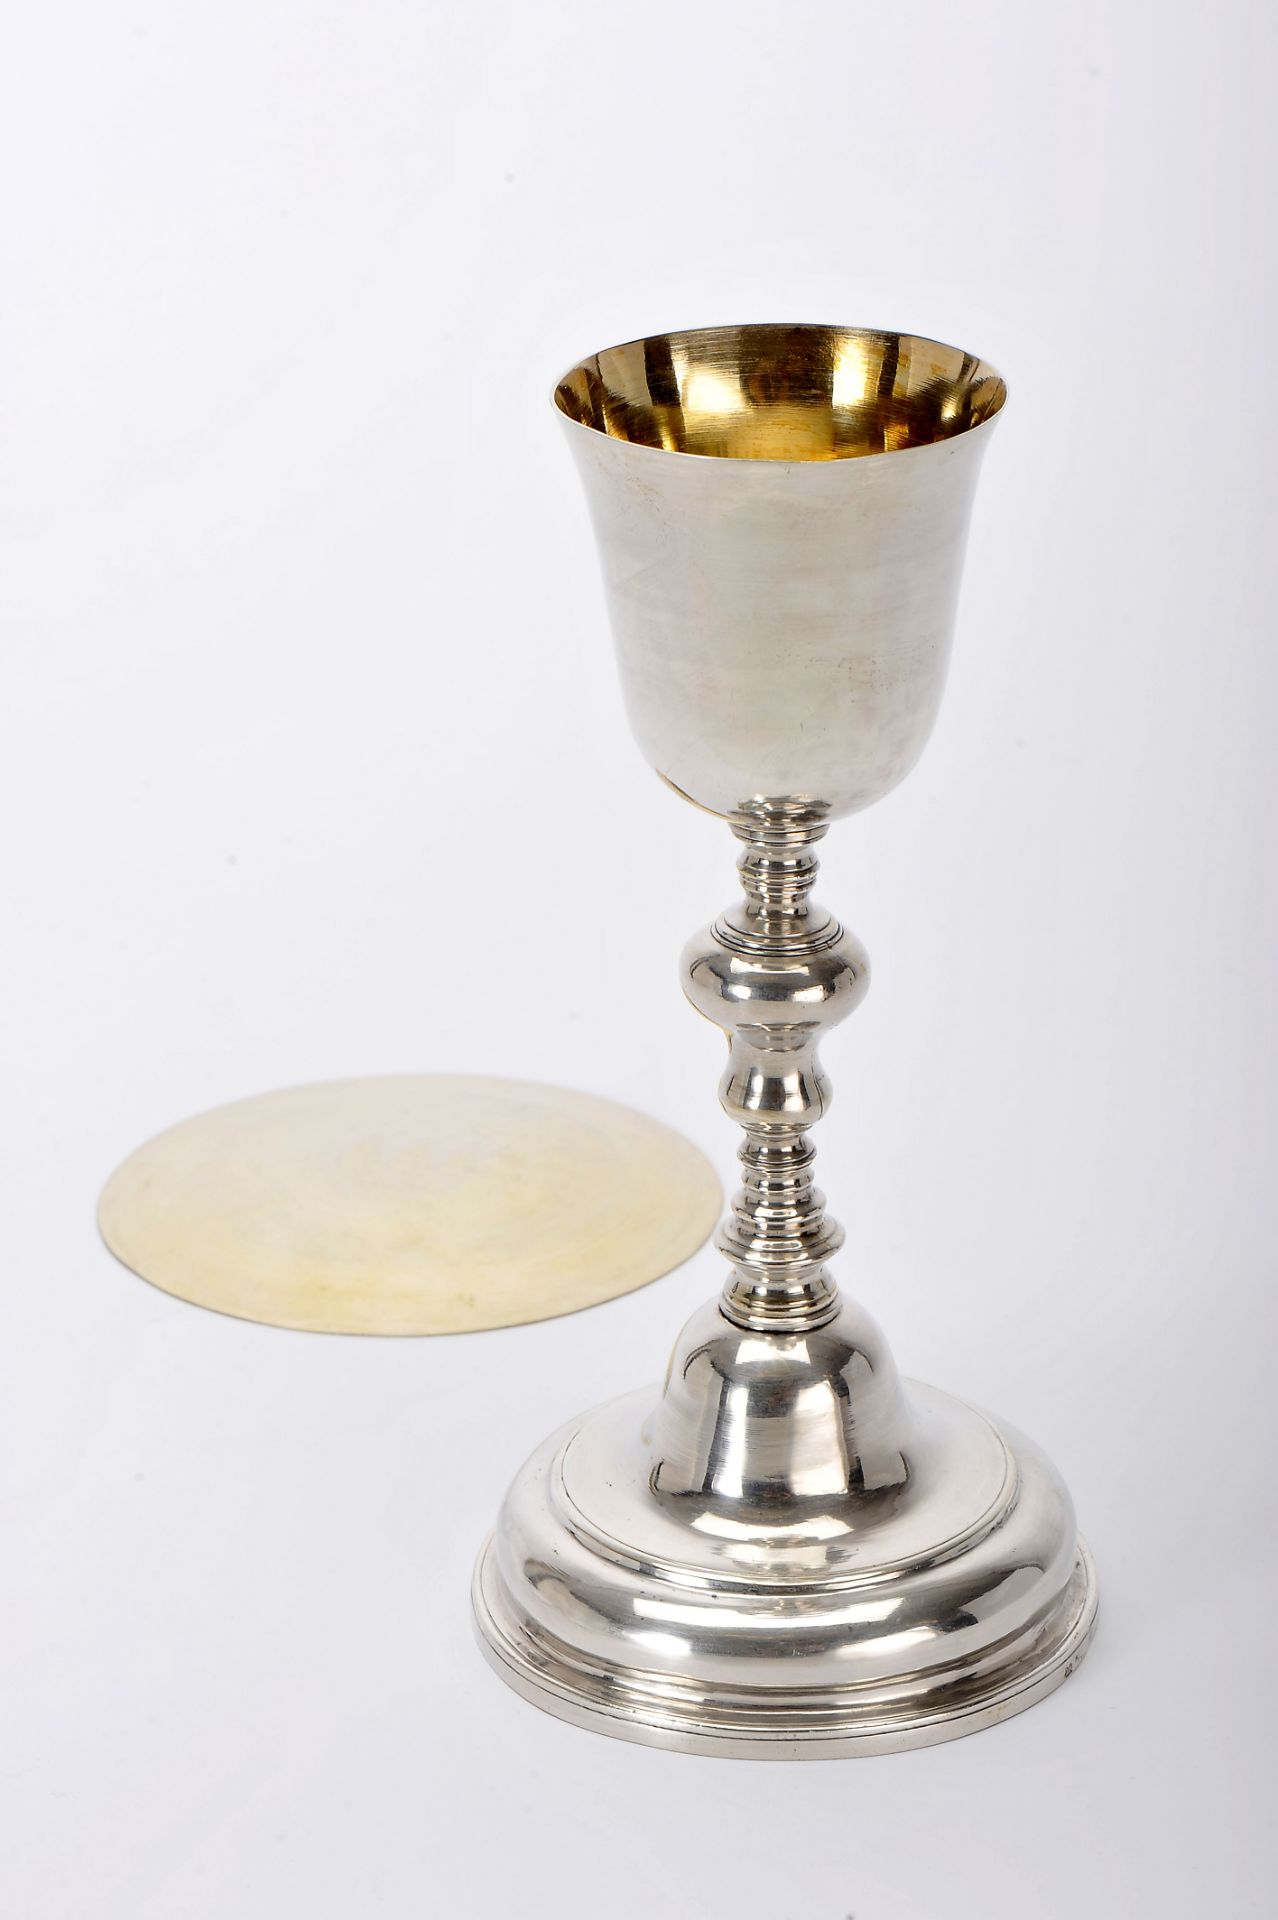 Chalice and paten - Image 2 of 3